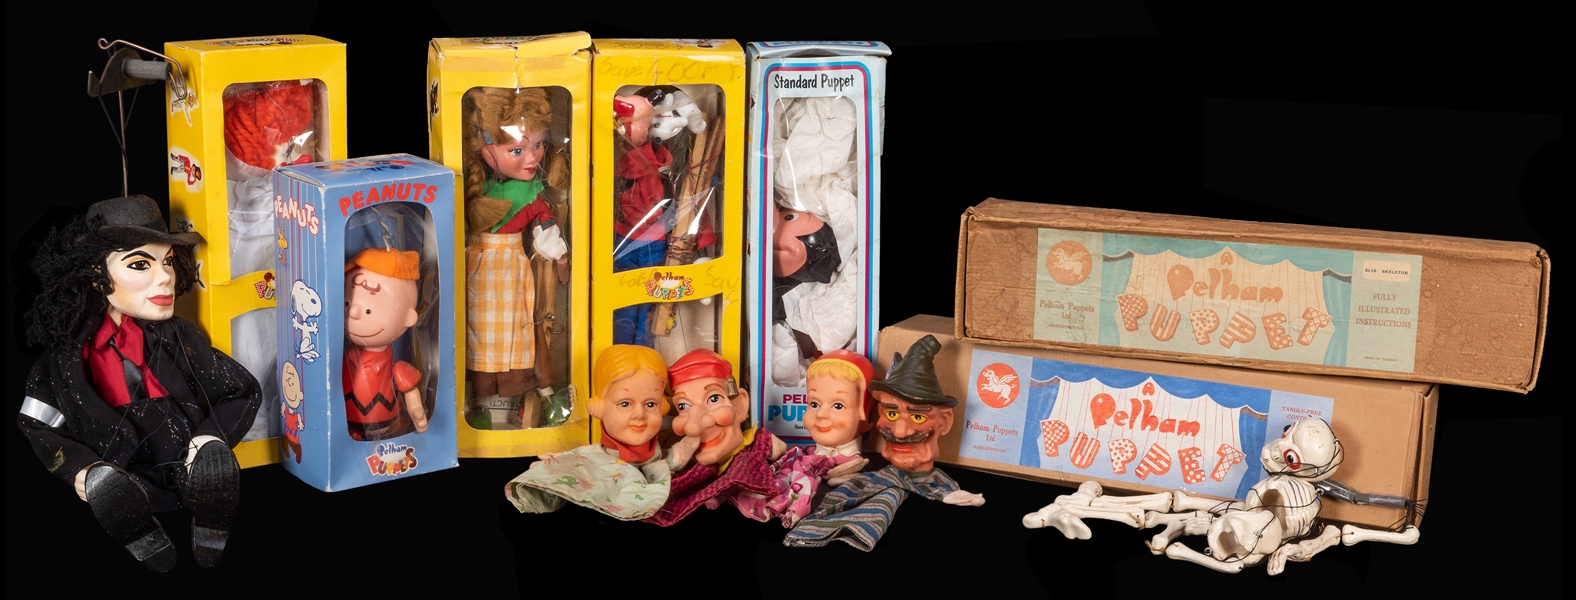 Lot of Pelham Puppets and Other Marionettes.